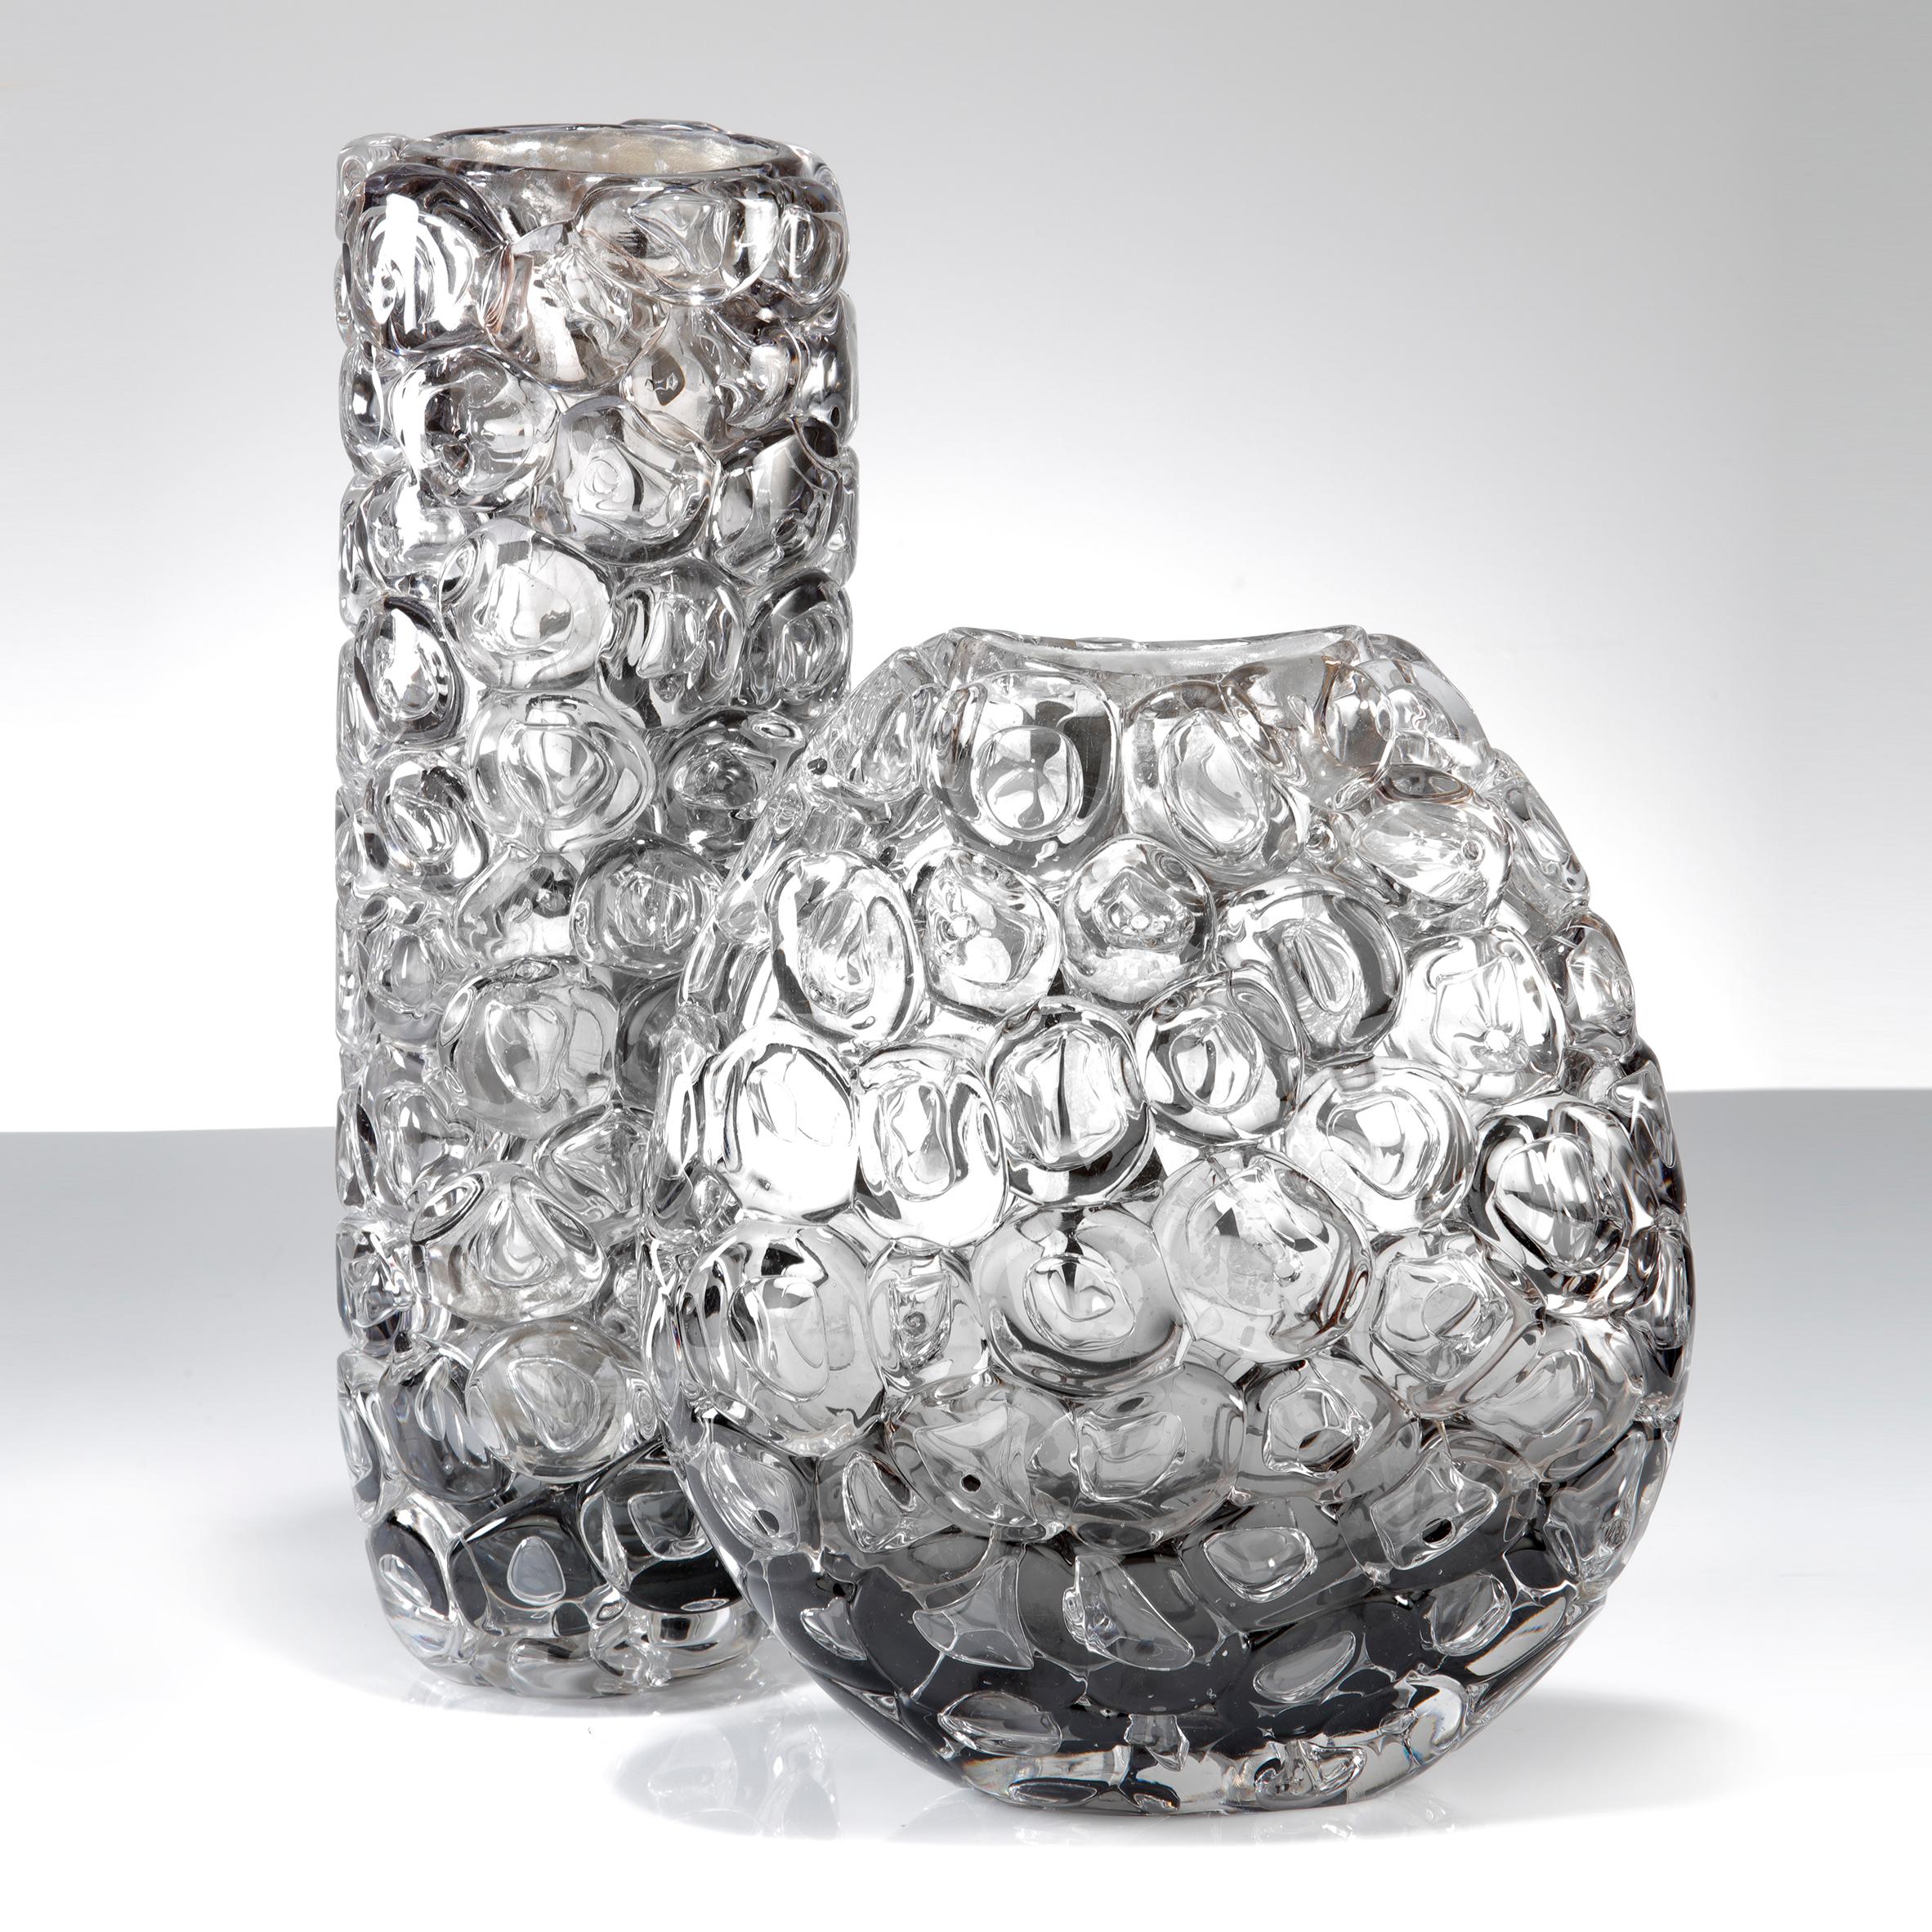 Art Glass Bubblewrap in Monochrome II, a Silver and Clear Glass Vase by Allister Malcolm